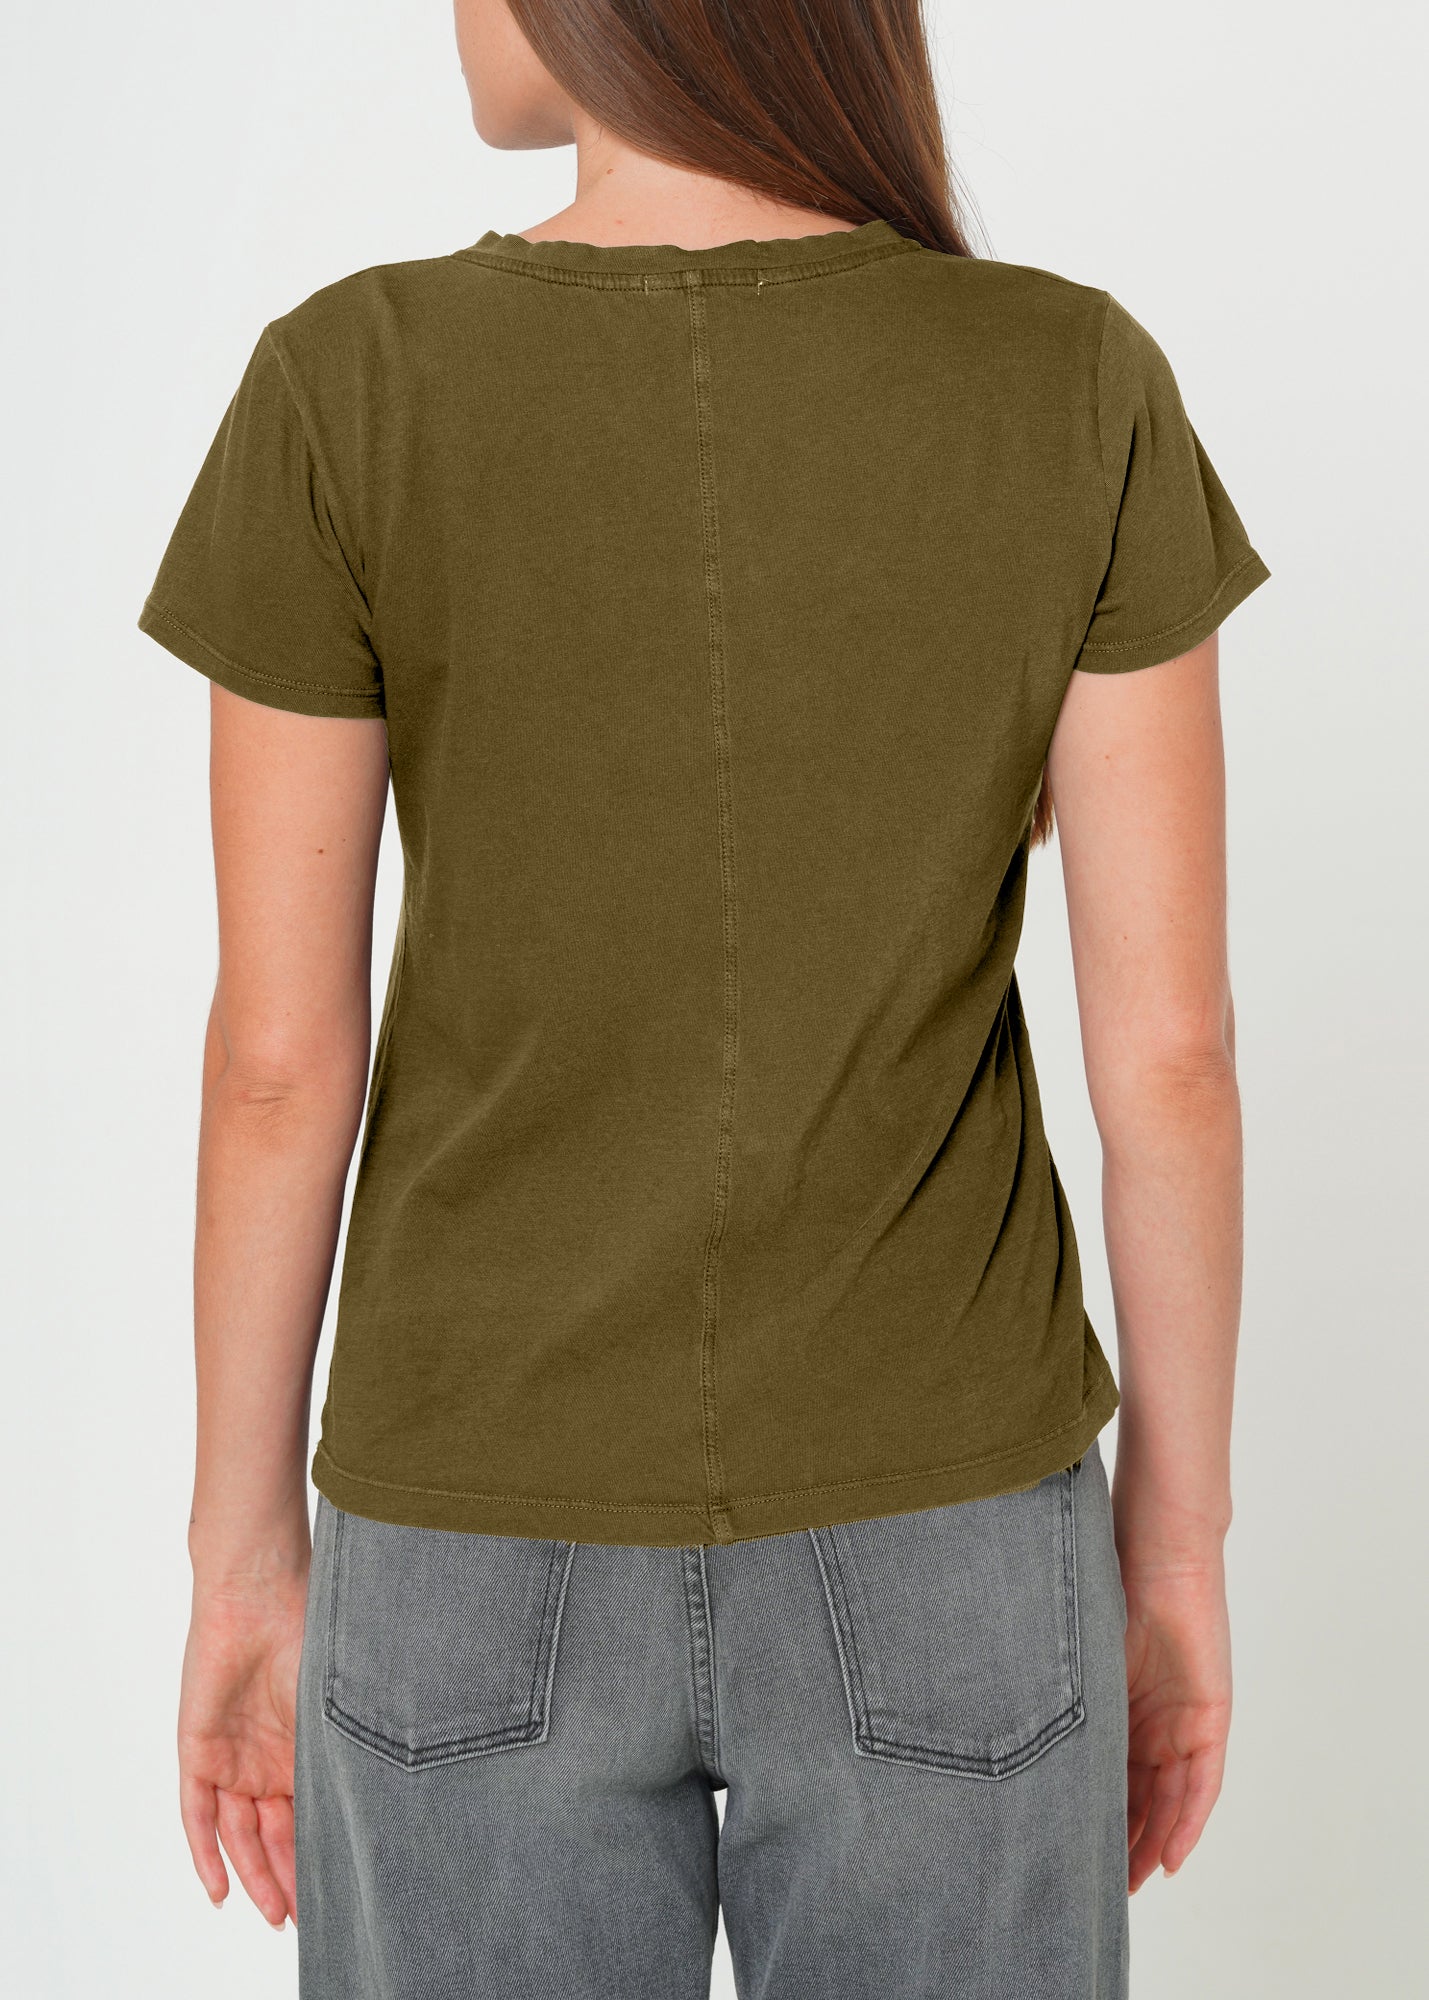 Supima Cotton V Neck Tee In Military Green